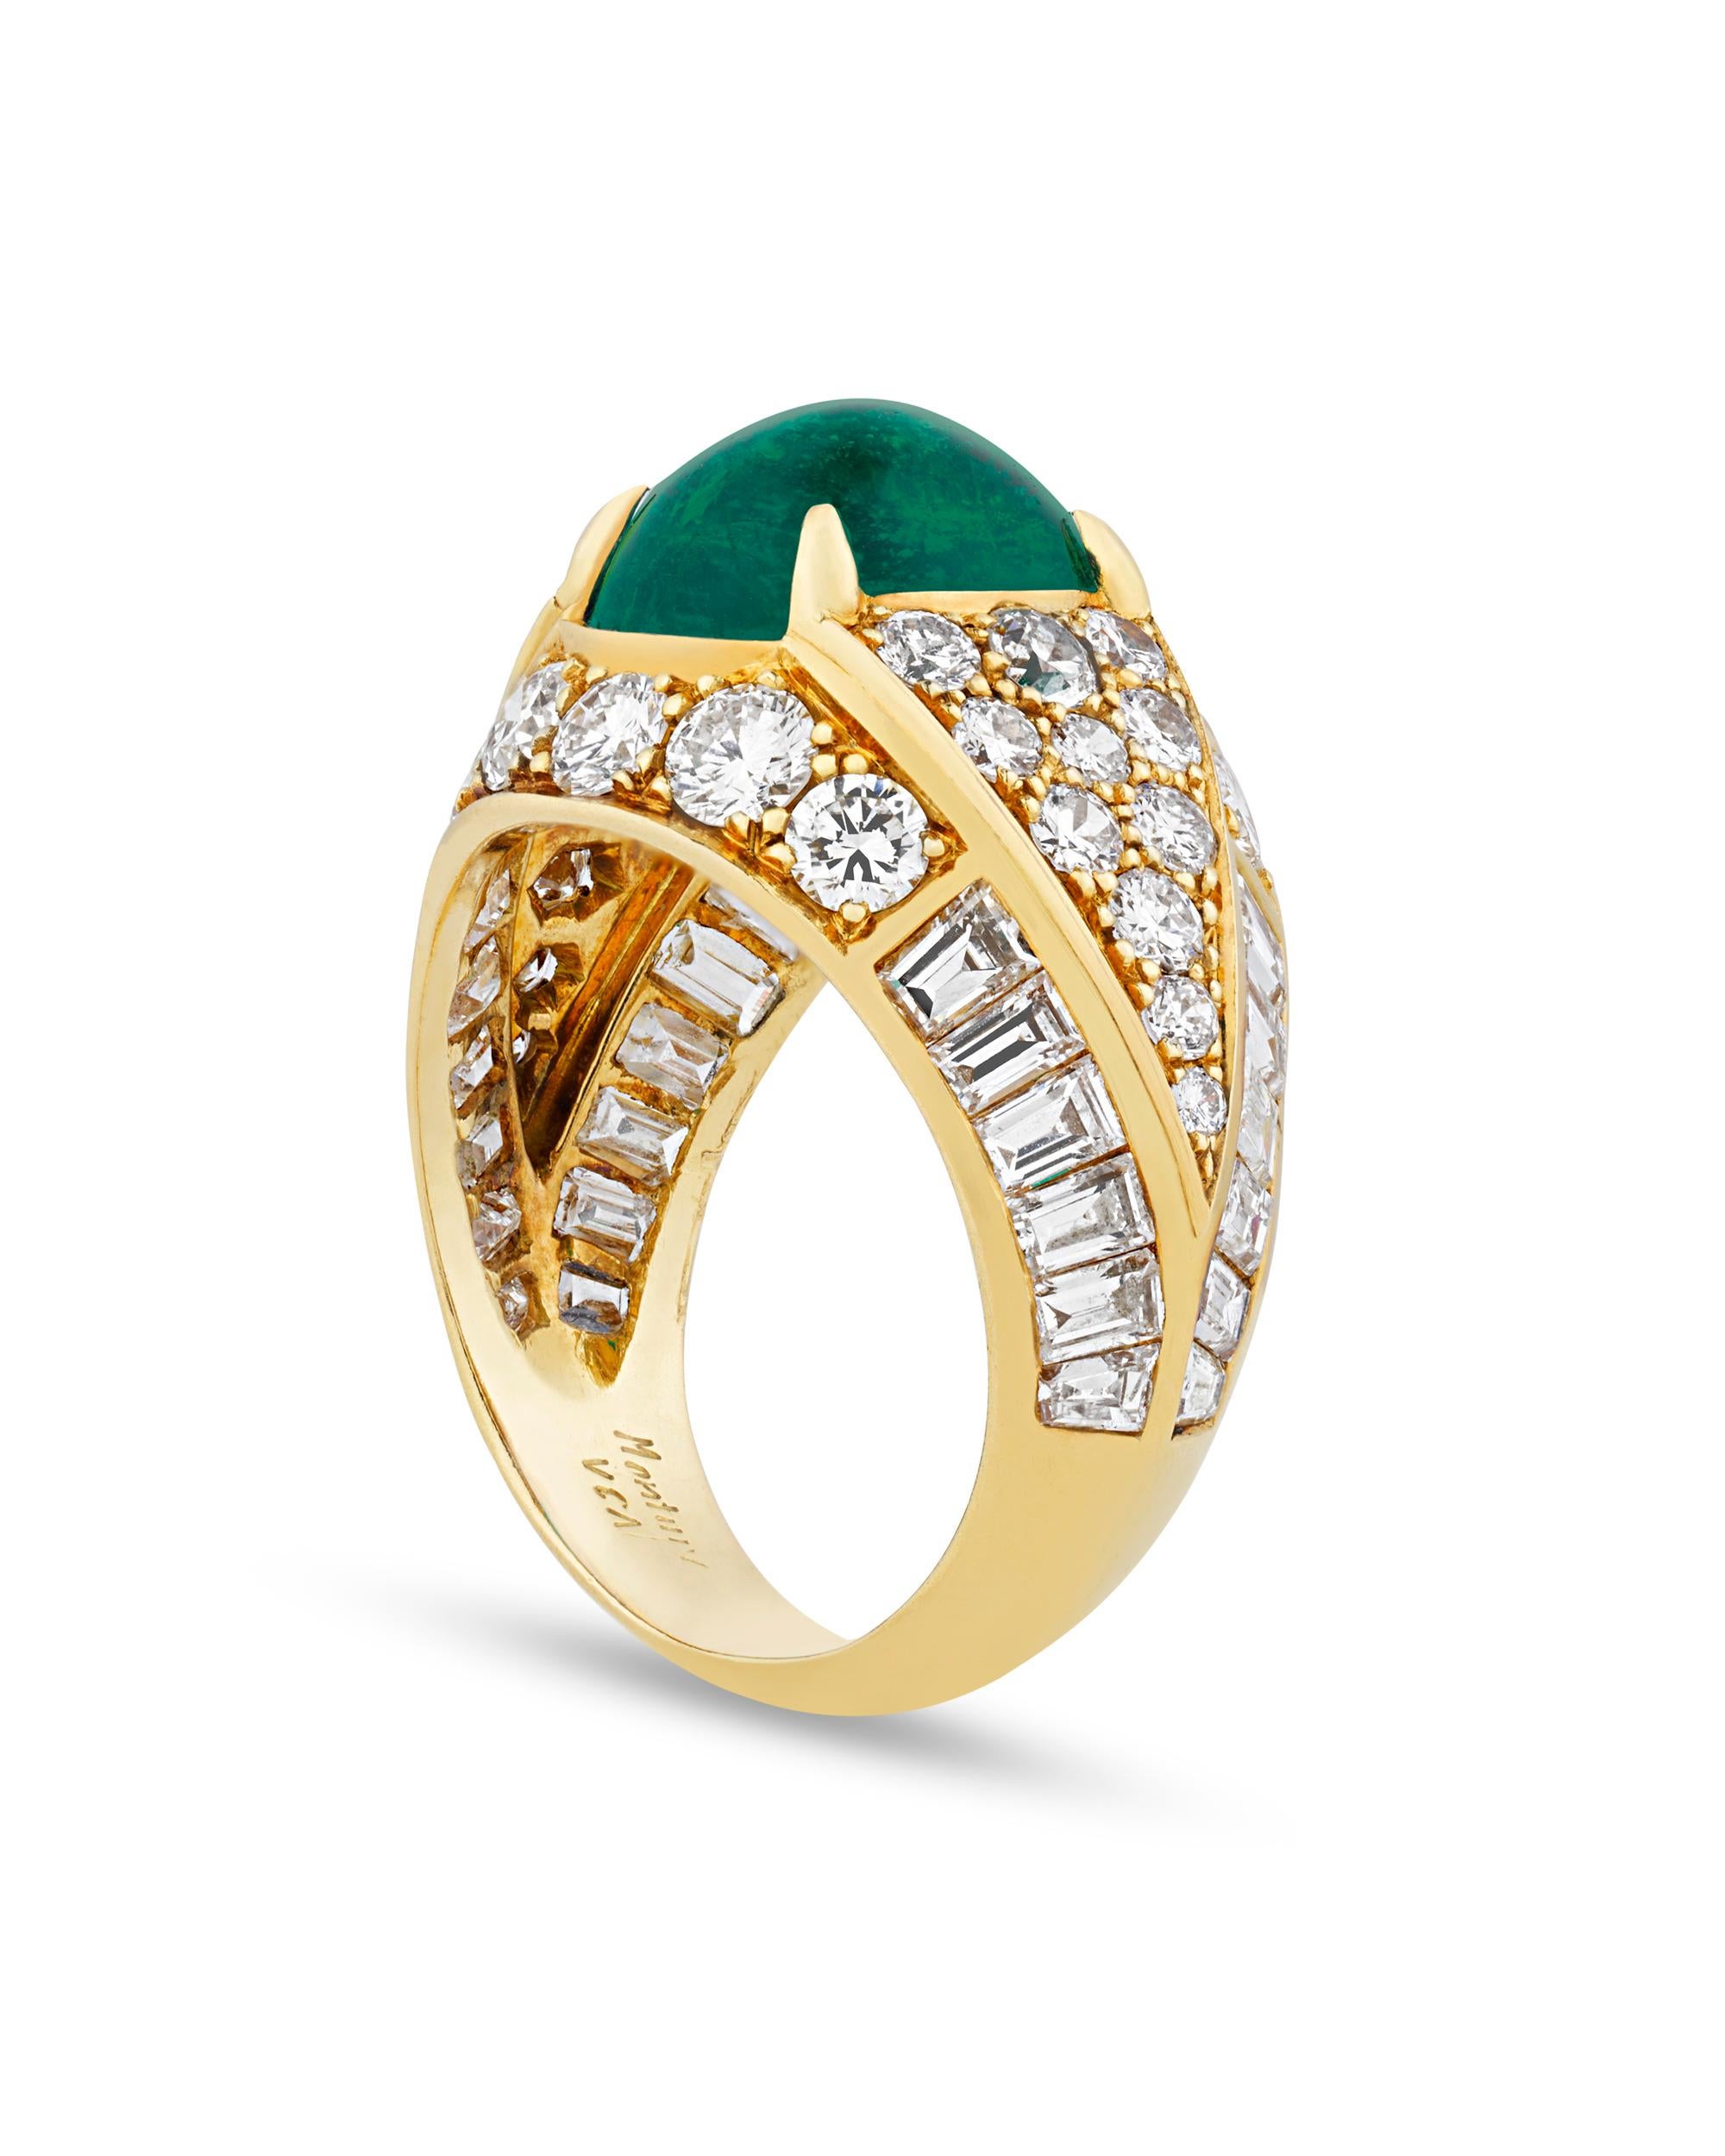 Modern Colombian Emerald Ring by Van Cleef & Arpels, 5.40 Carats